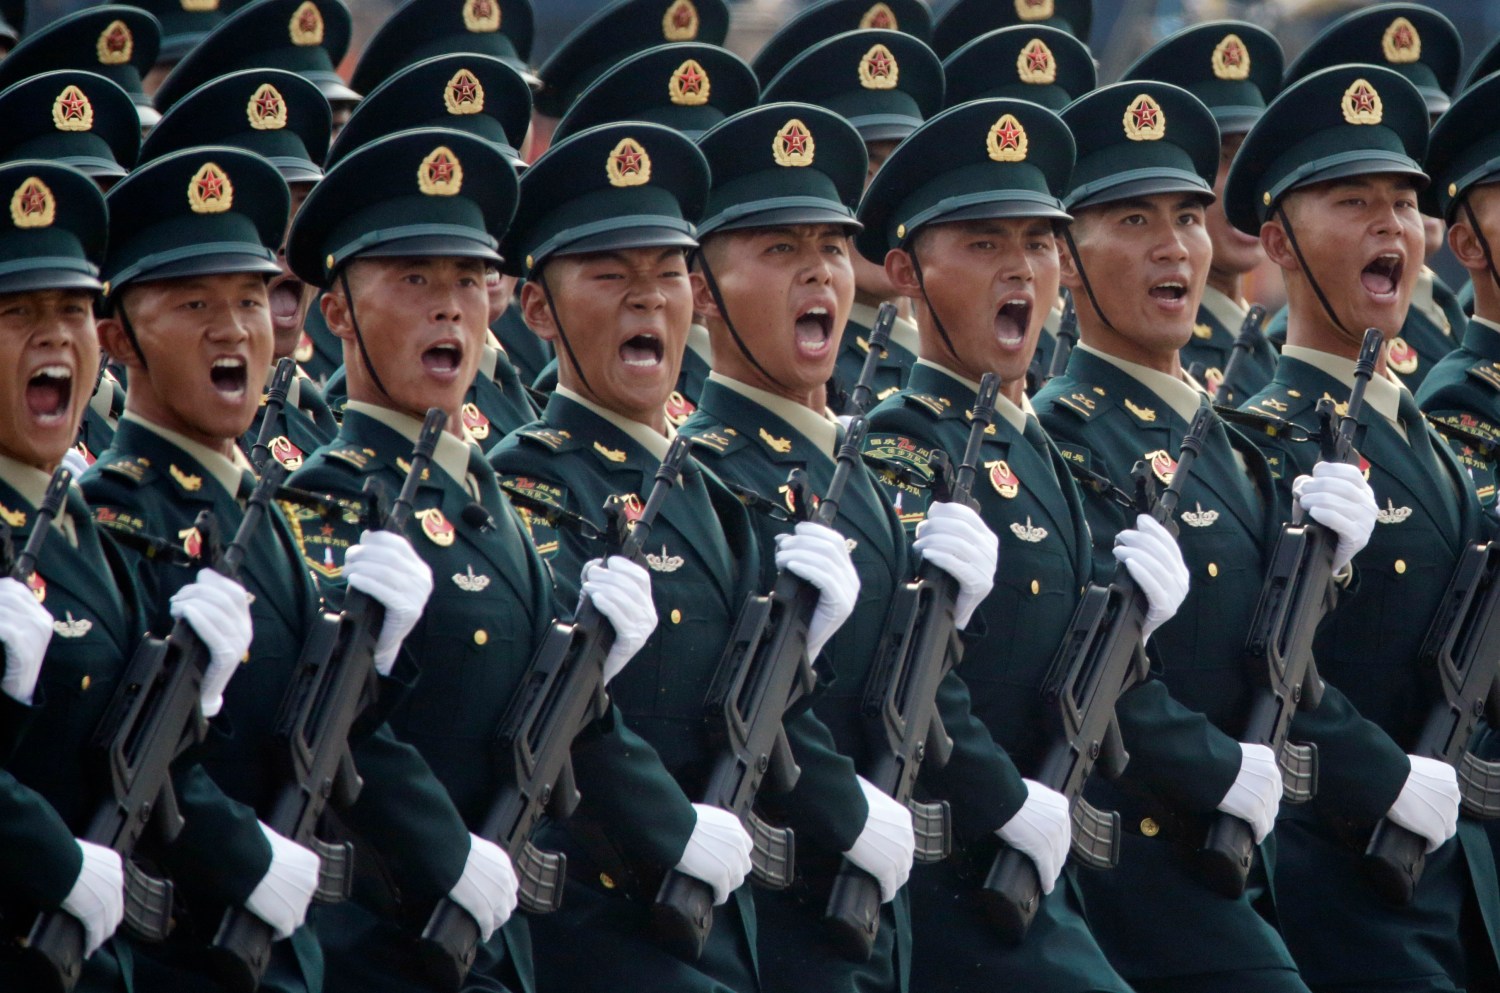 Soldiers of People's Liberation Army (PLA) march in formation past Tiananmen Square during the military parade marking the 70th founding anniversary of People's Republic of China, on its National Day in Beijing, China October 1, 2019. REUTERS/Jason Lee - SP1EFA10HSD12